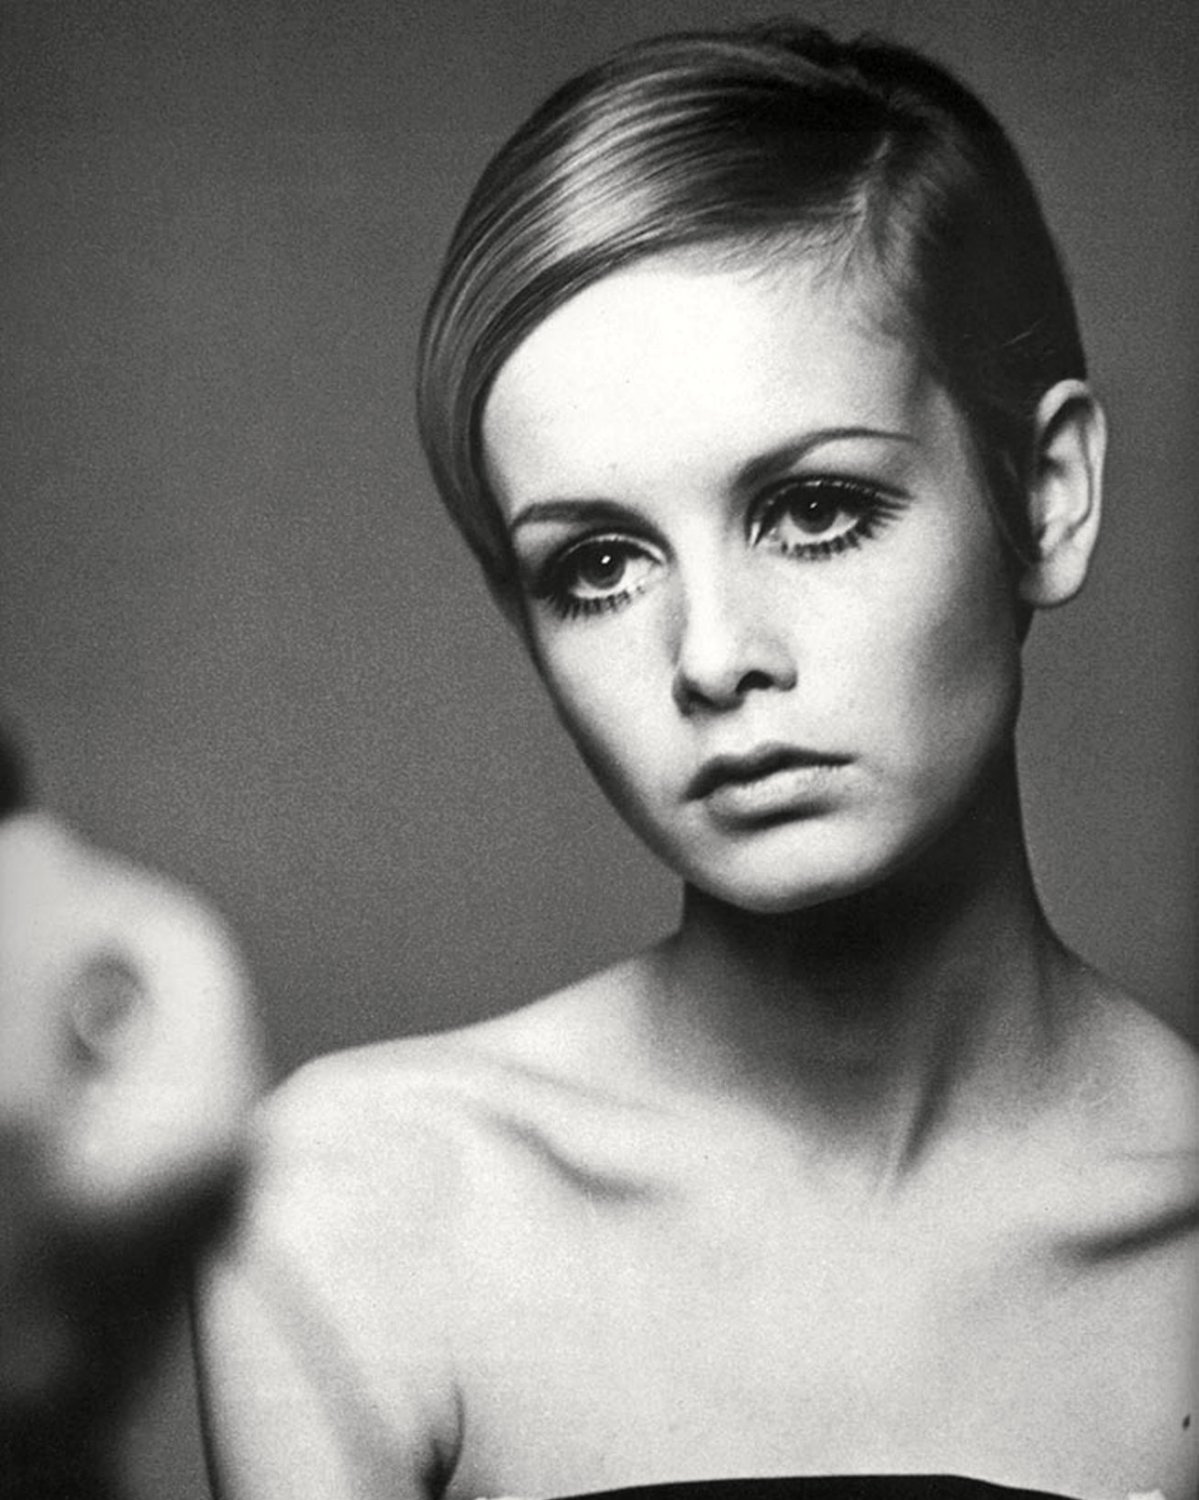  TWIGGY  ENGLISH MODEL  ACTRESS AND SINGER 8X10 PUBLICITY PHOTO EE 096 